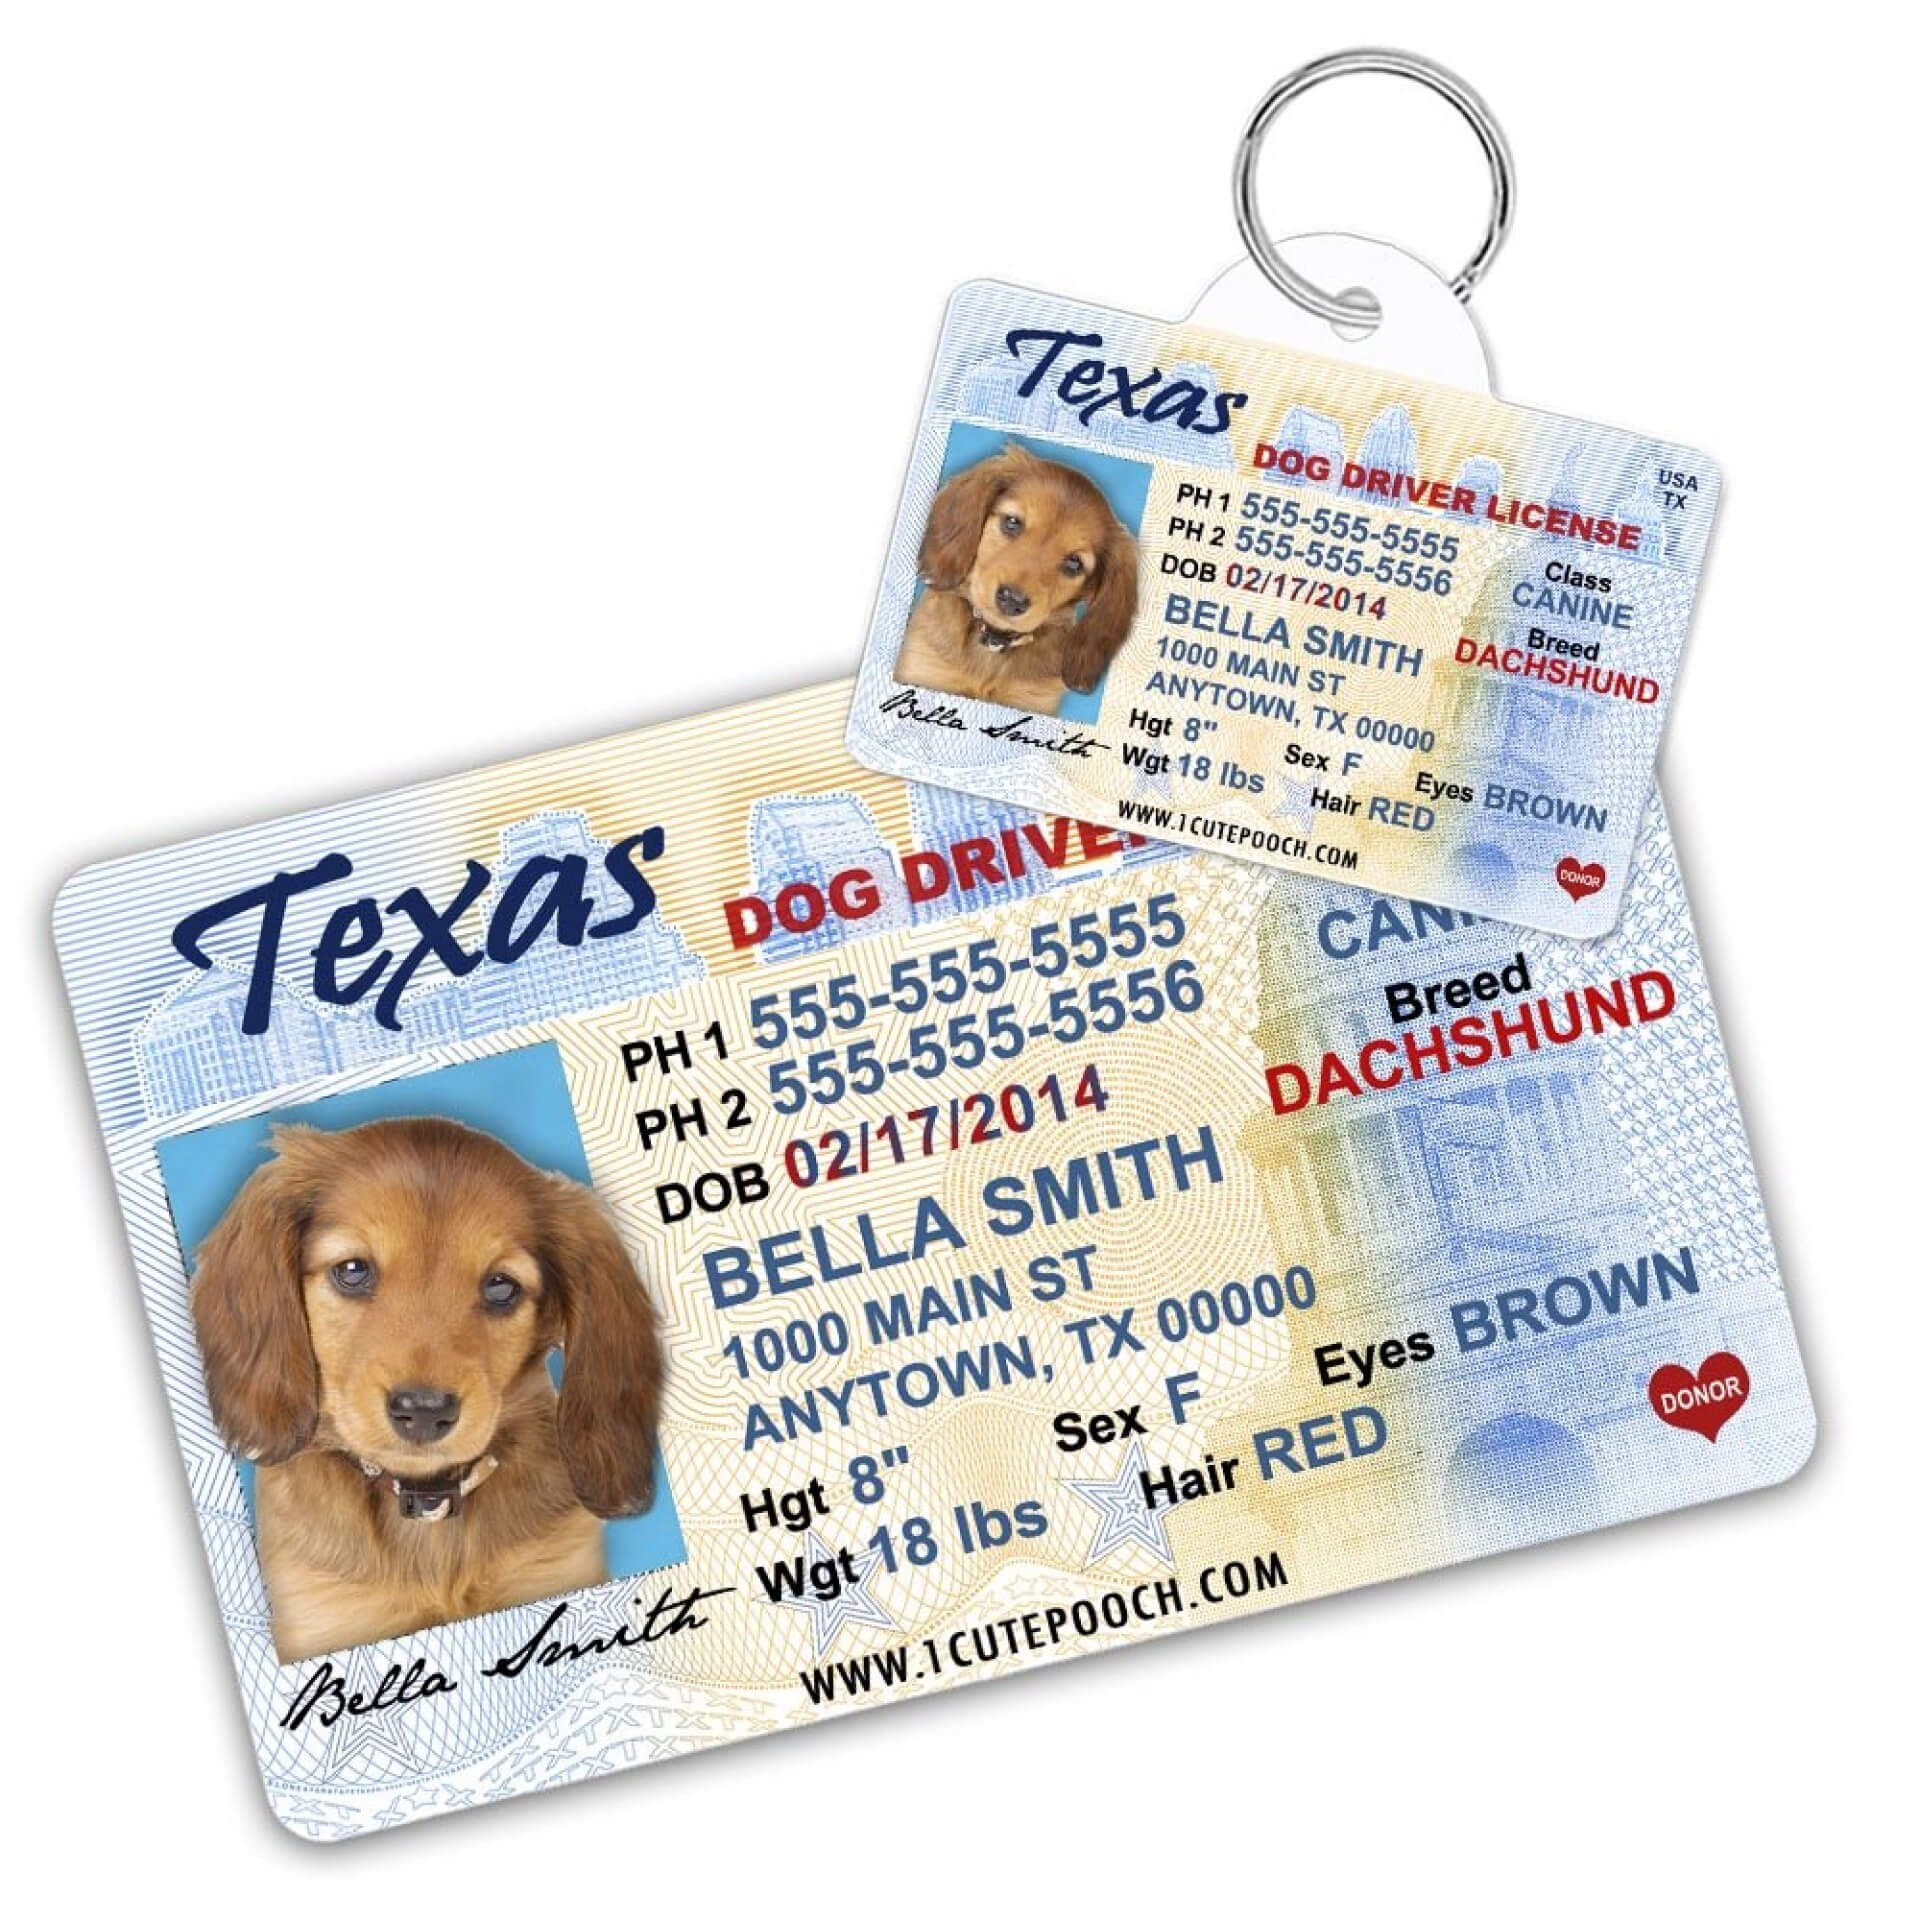 043 Printable Service Dog Id Card Template Staggering Ideas Within Texas Id Card Template